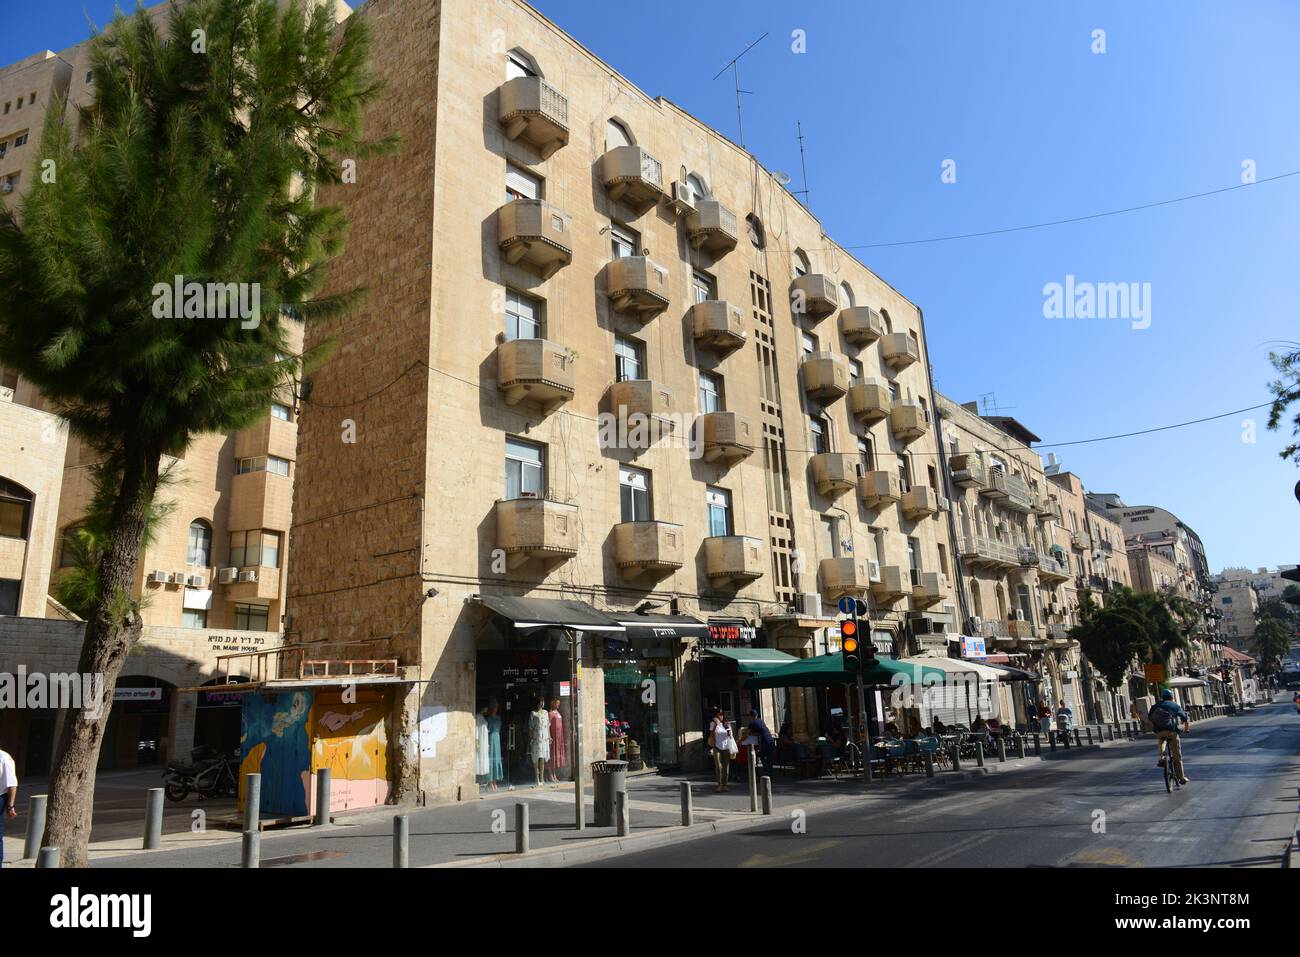 King George V street in the city center of West Jerusalem, Israel. Stock Photo